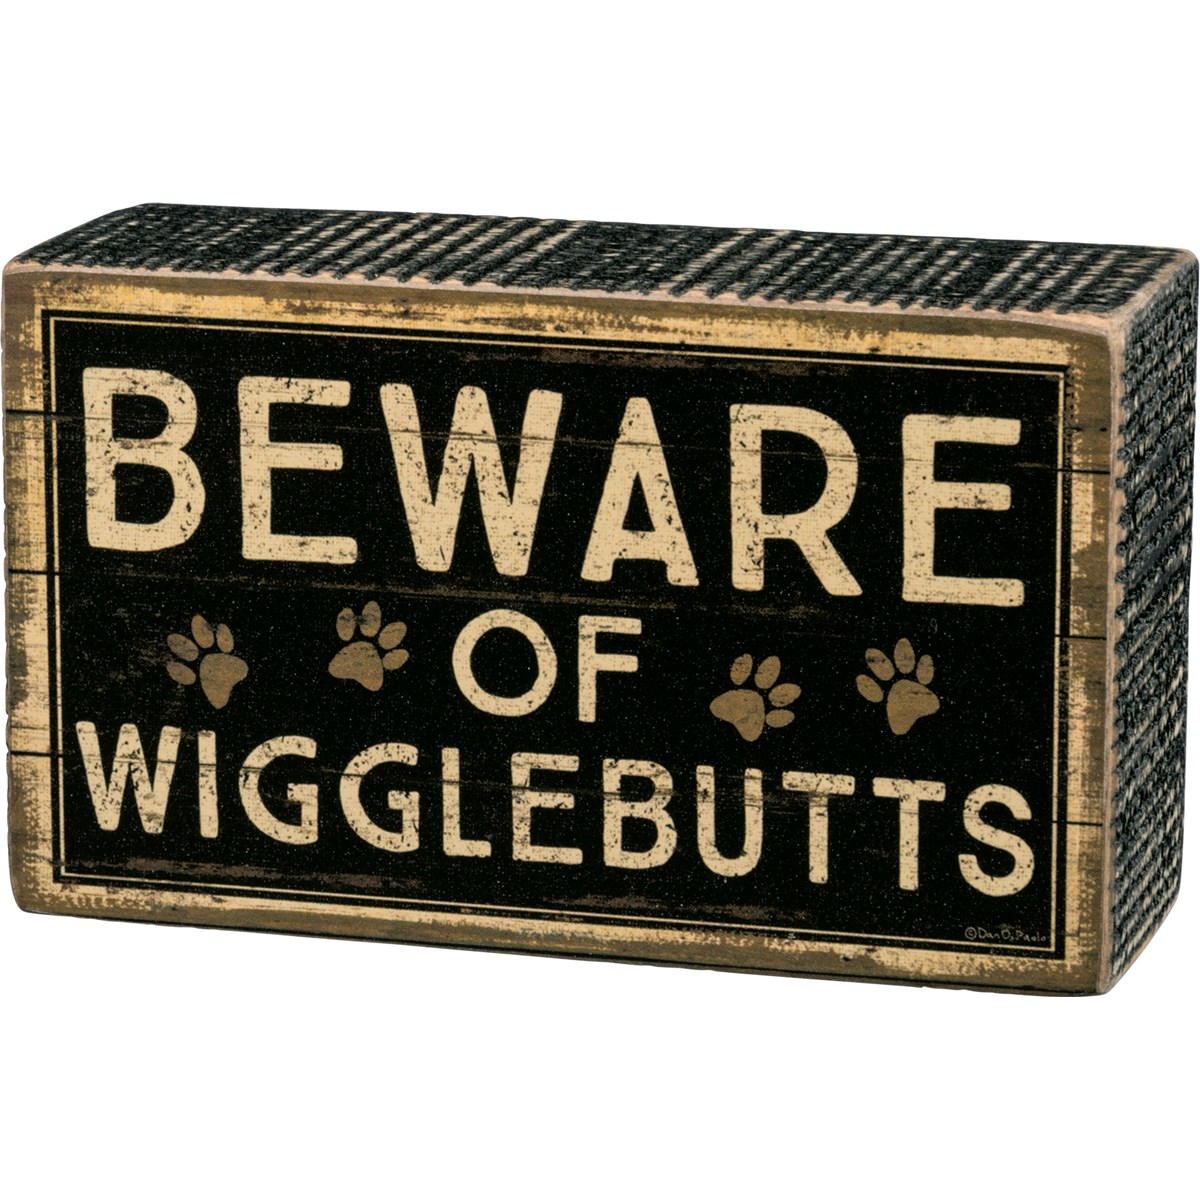 Beware Of Wigglebutts Box Sign - Wood, Paper